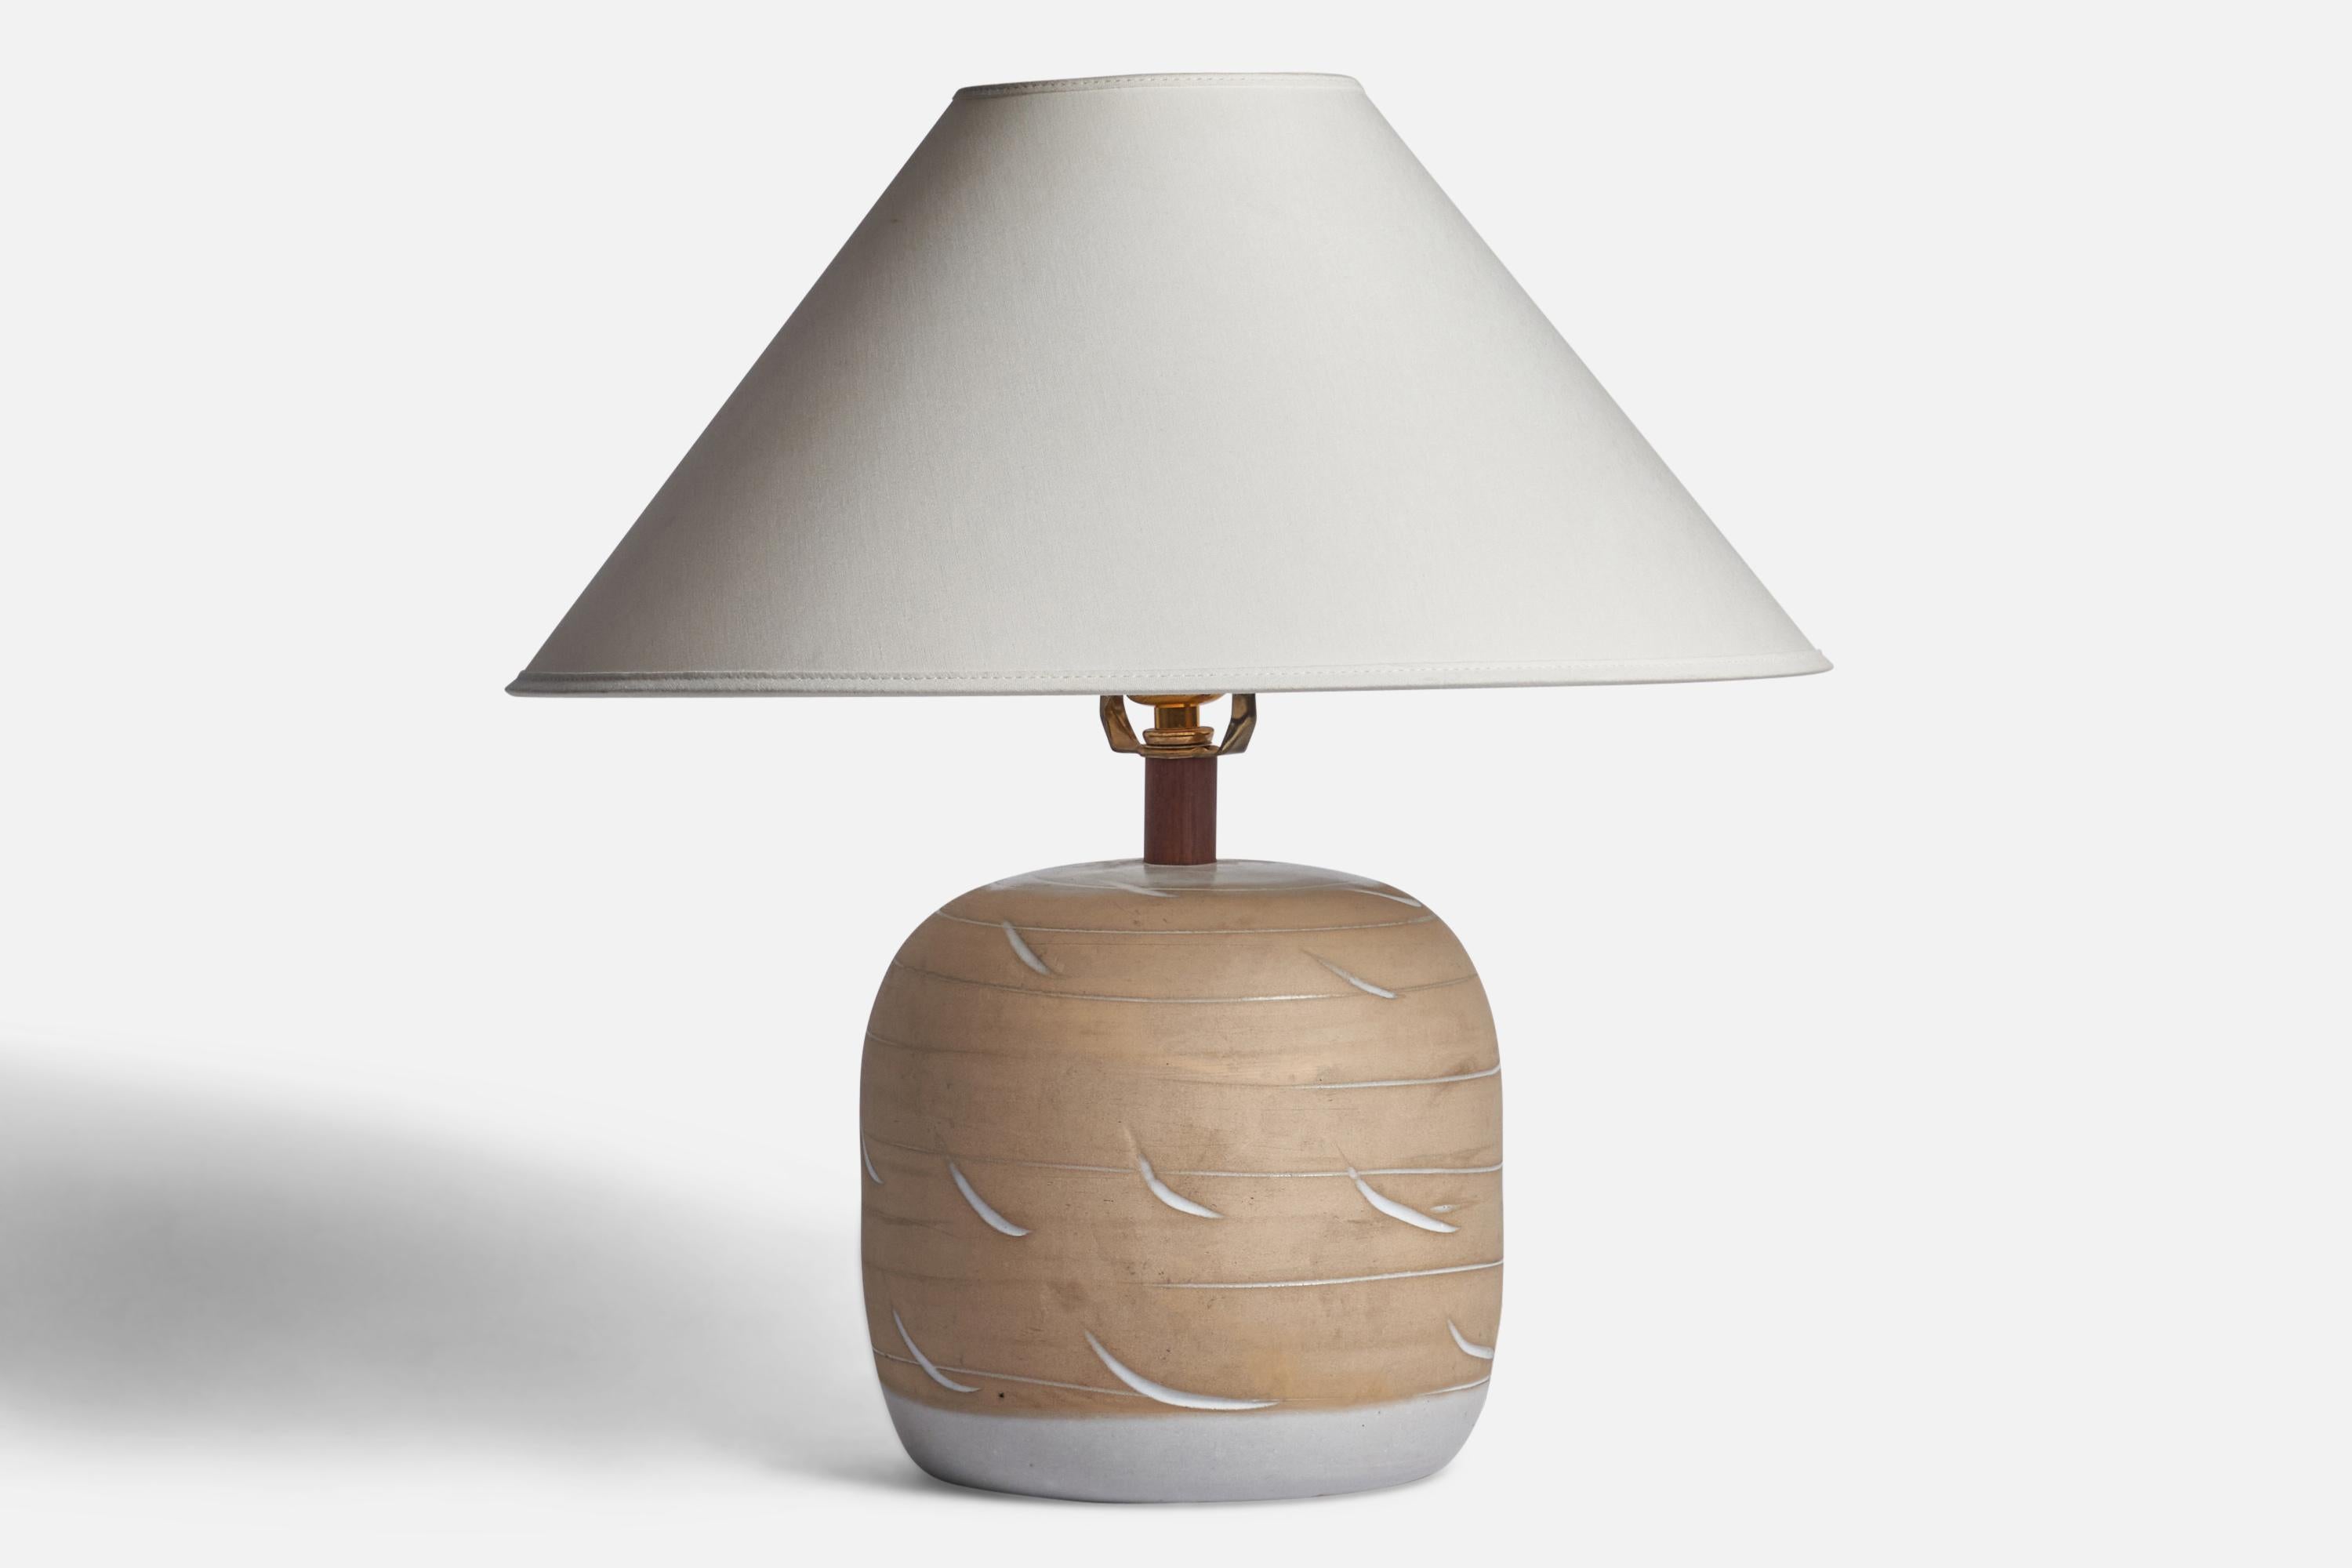 A grey and beige-glazed ceramic table and walnut lamp designed by Jane & Gordon Martz and produced by Marshall Studios, USA, 1960s.

Dimensions of Lamp (inches): 12” H x 8” Diameter
Dimensions of Shade (inches): 4.5” Top Diameter x 15.75” Bottom